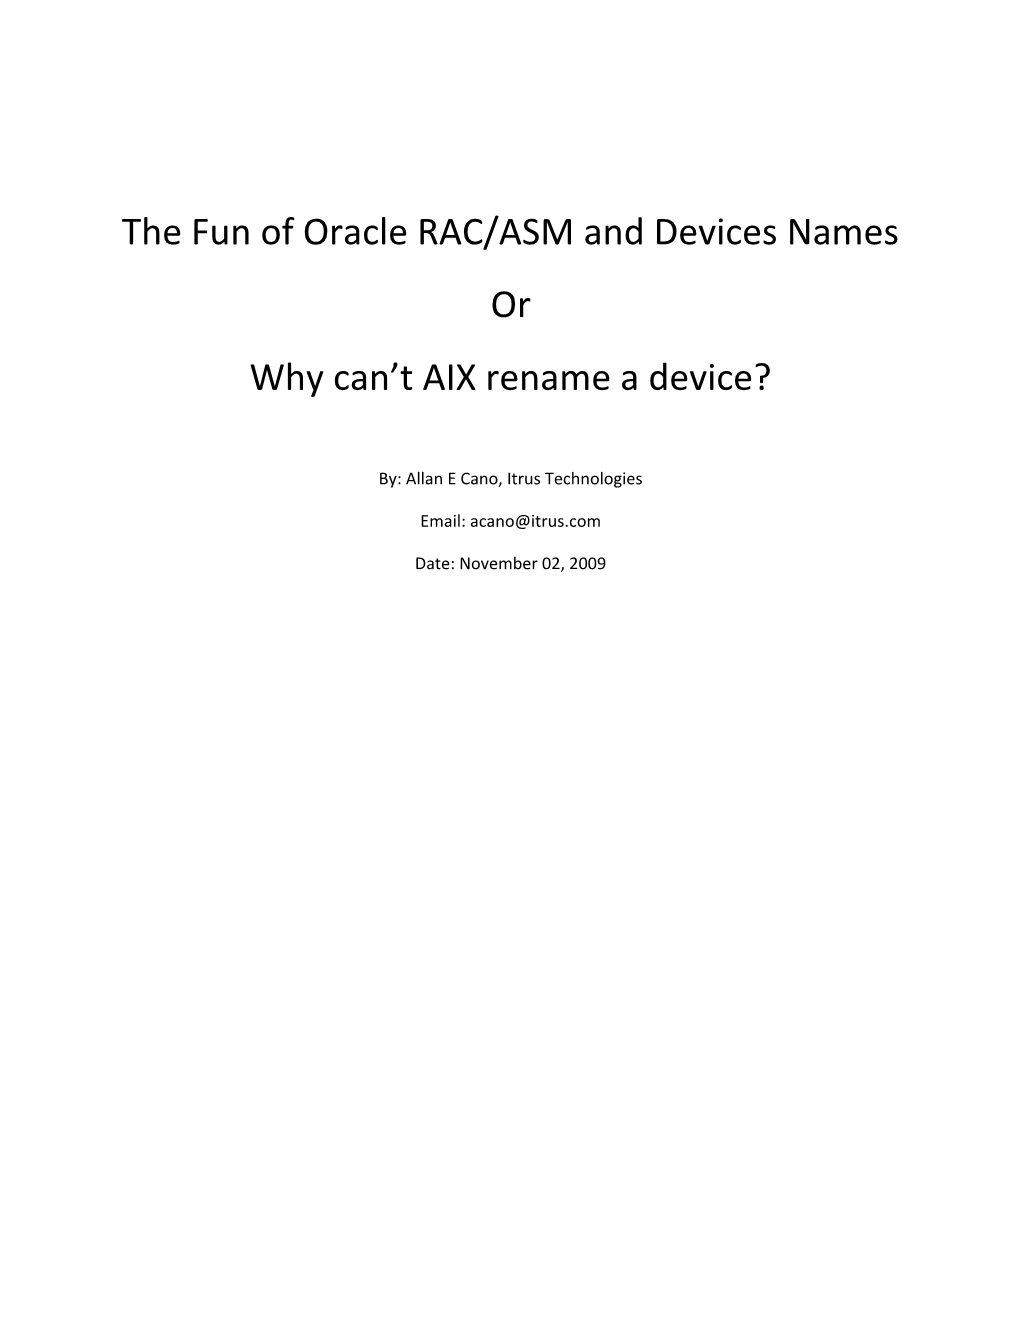 The Fun of Oracle RAC/ASM and Devices Names